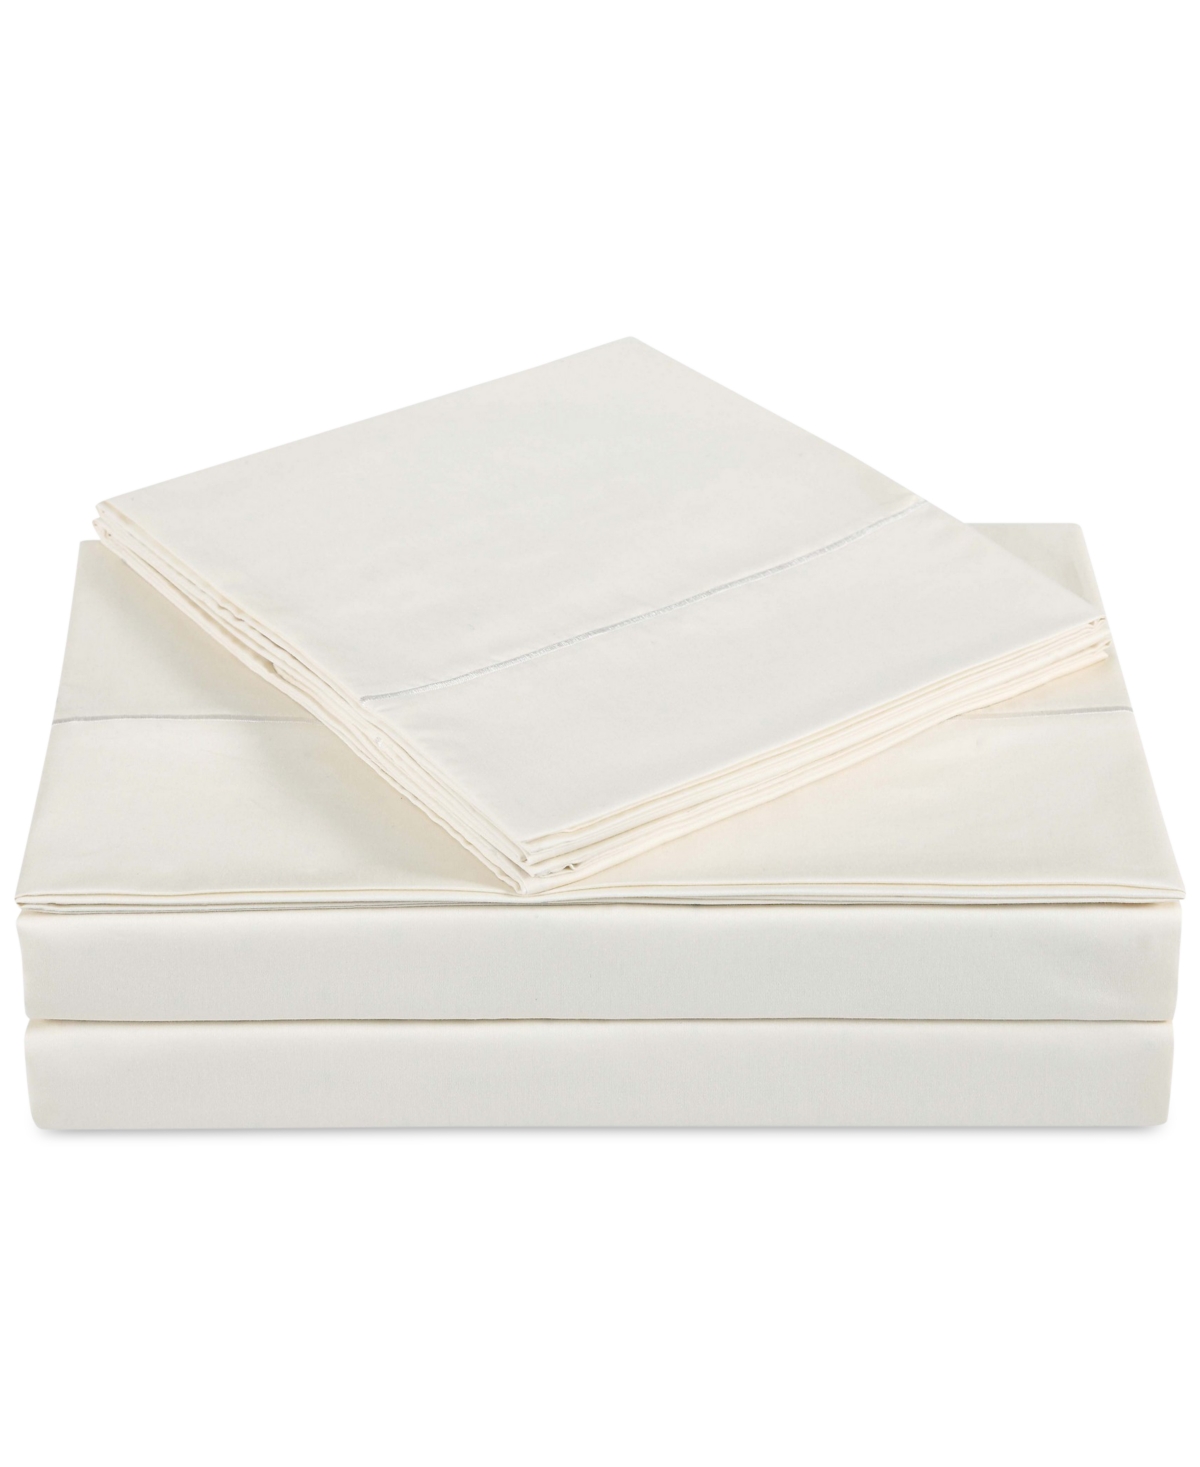 Charisma Classic Cotton Sateen 310 Thread Count 4-Pc Solid King Sheet Set $260